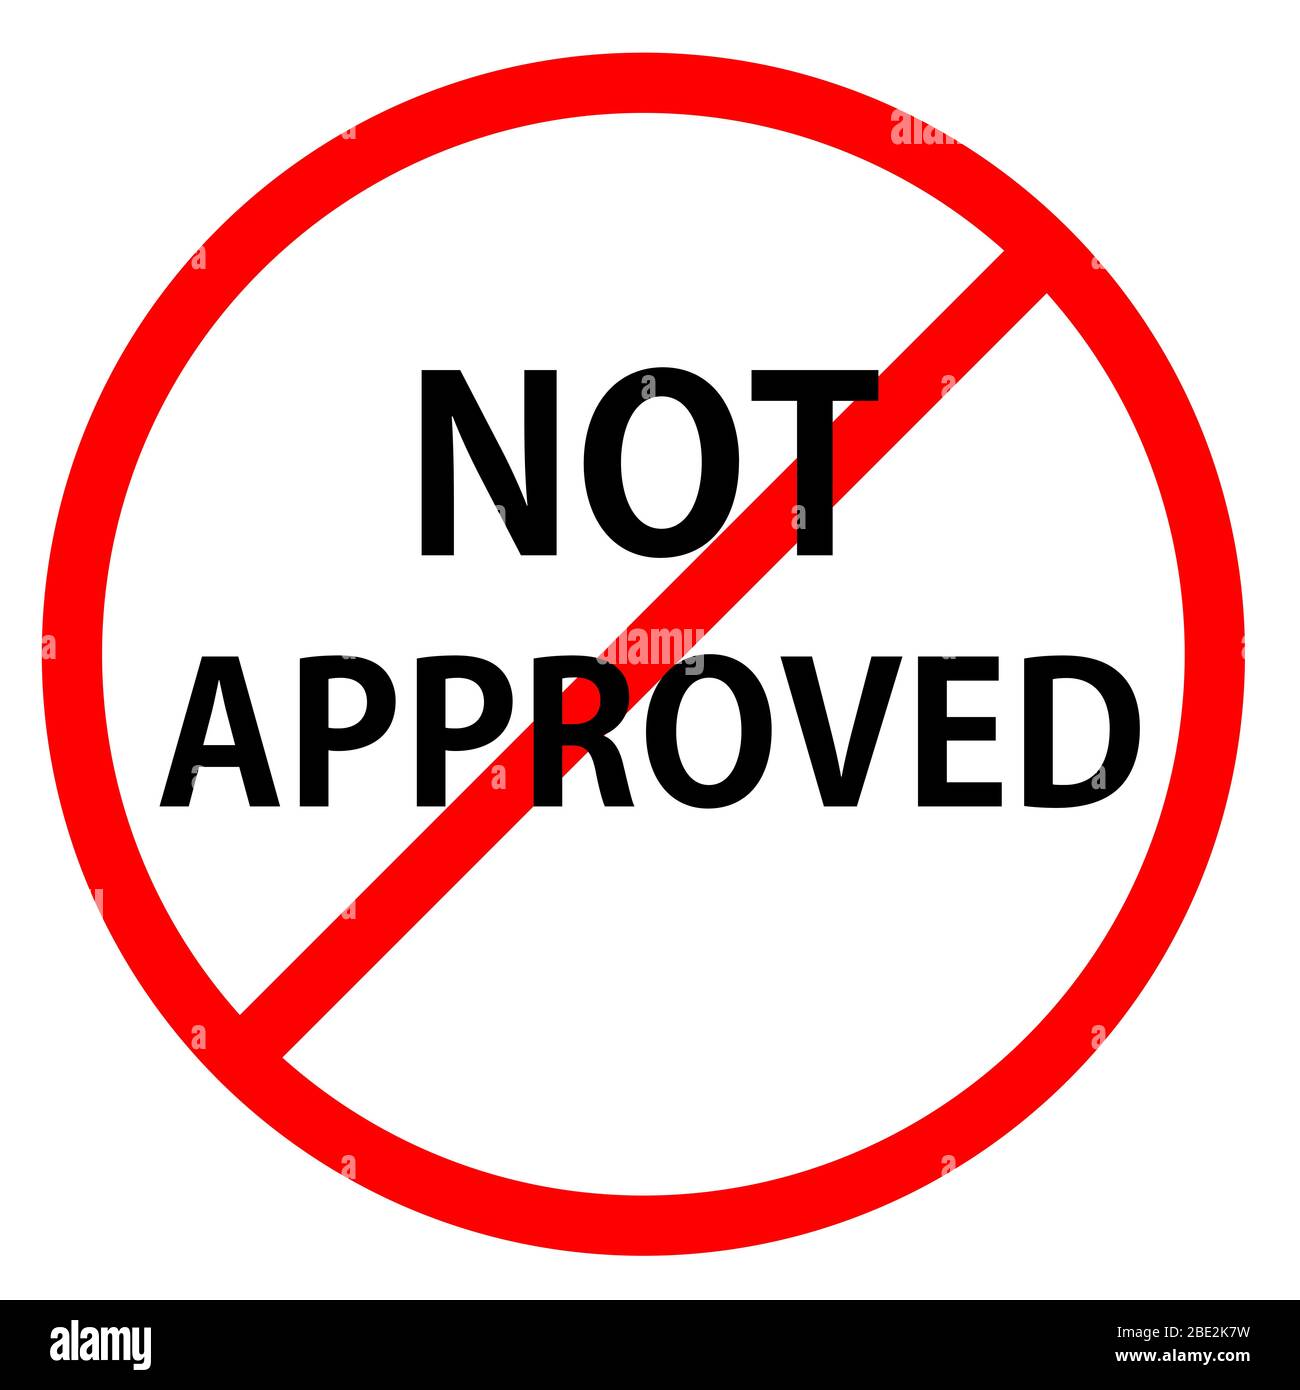 Not approved is in red circle With red line projected through the circle. Text is in traffic sign. Stock Photo